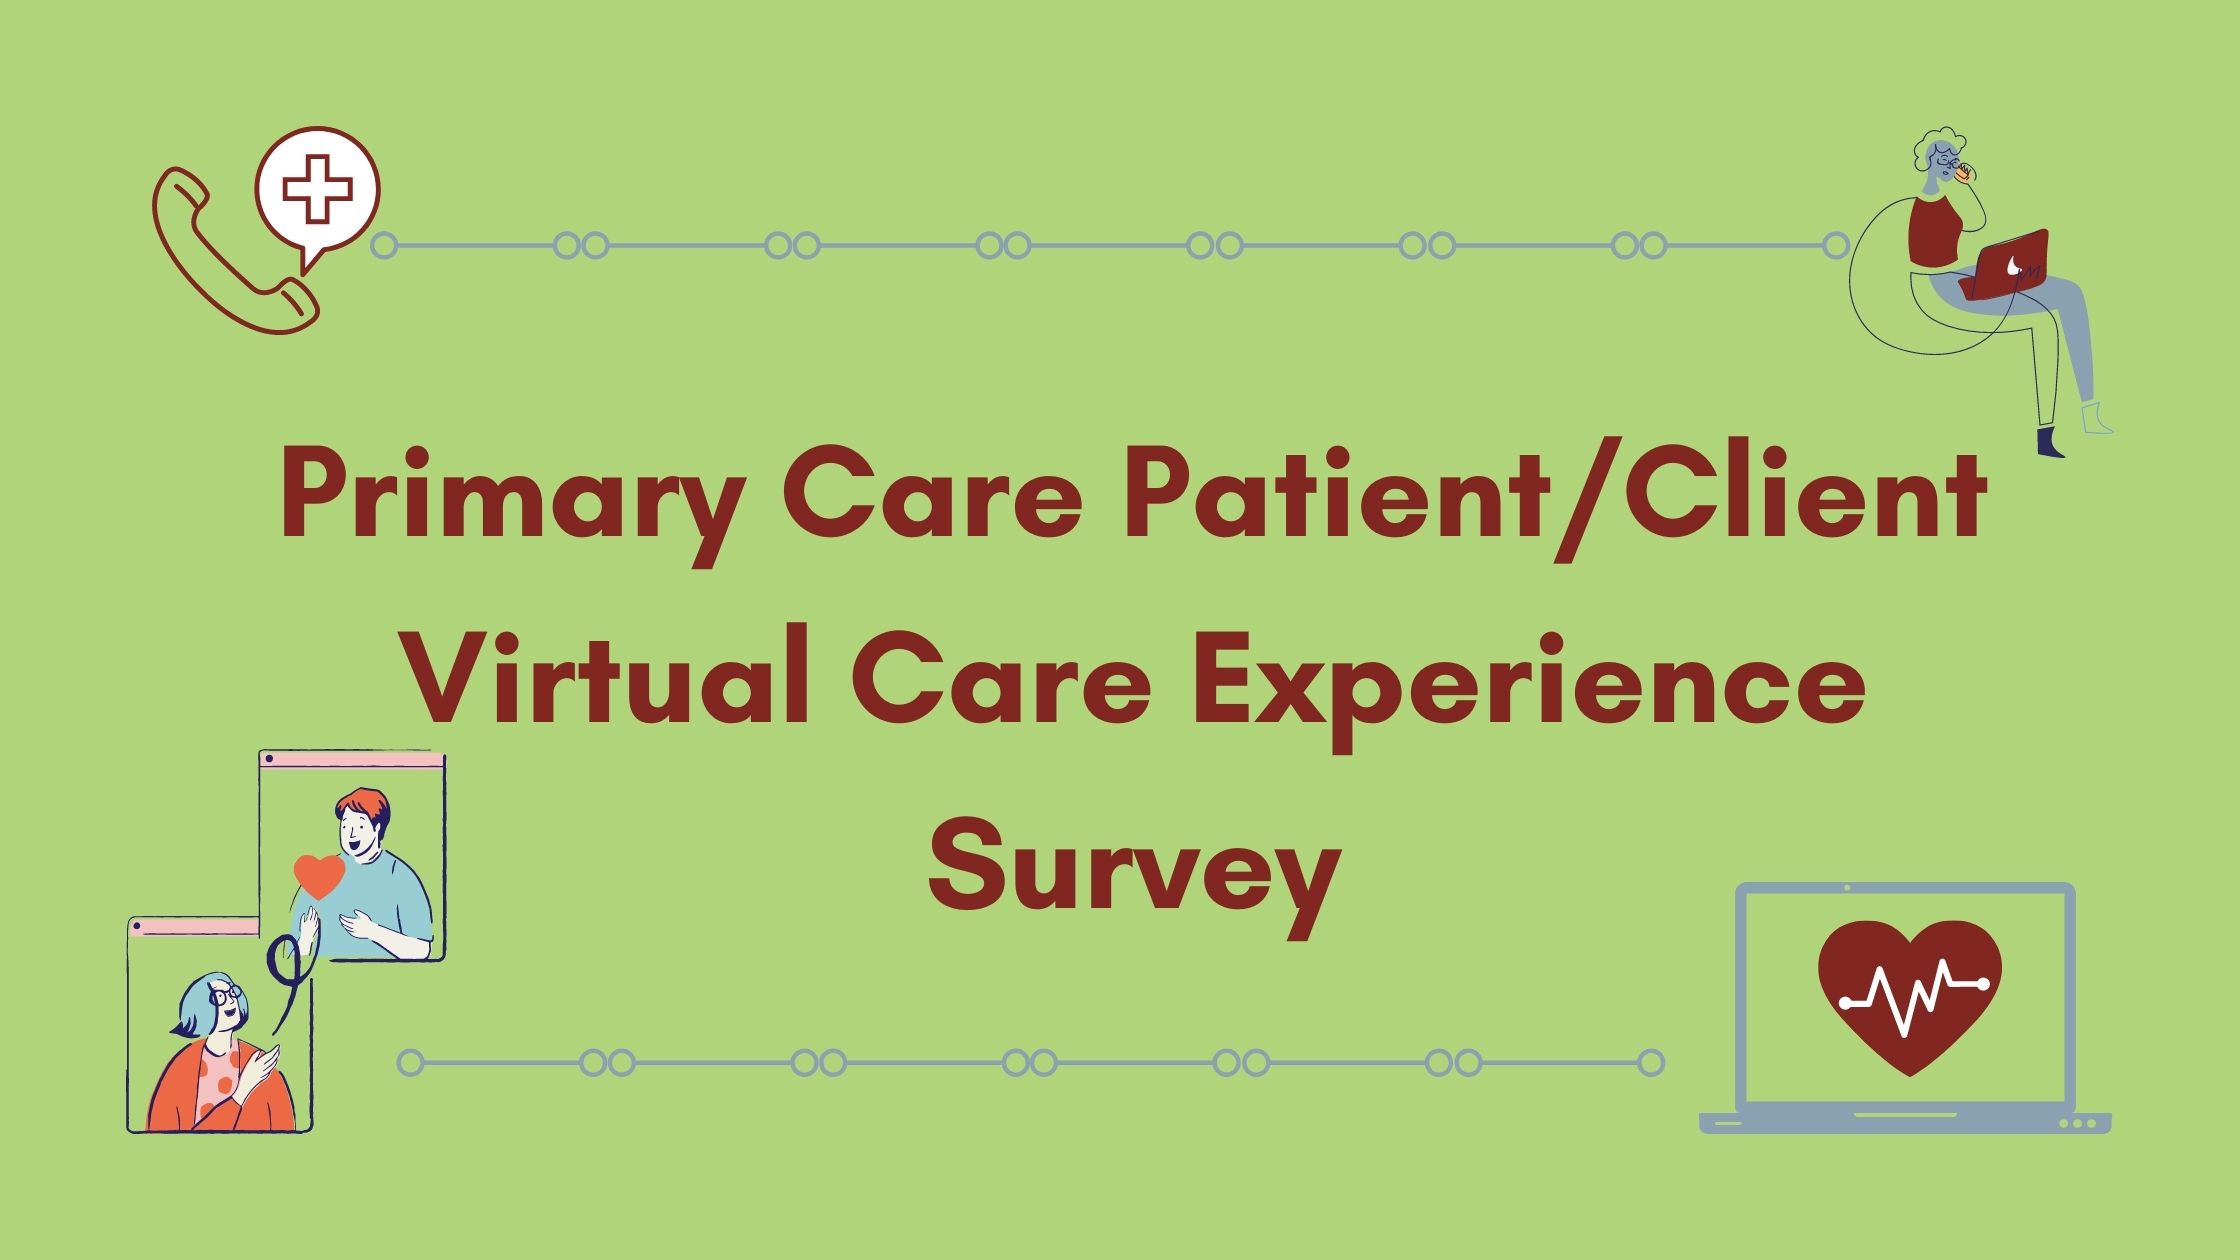 Let's Capture the Patient Experience with Virtual Care!